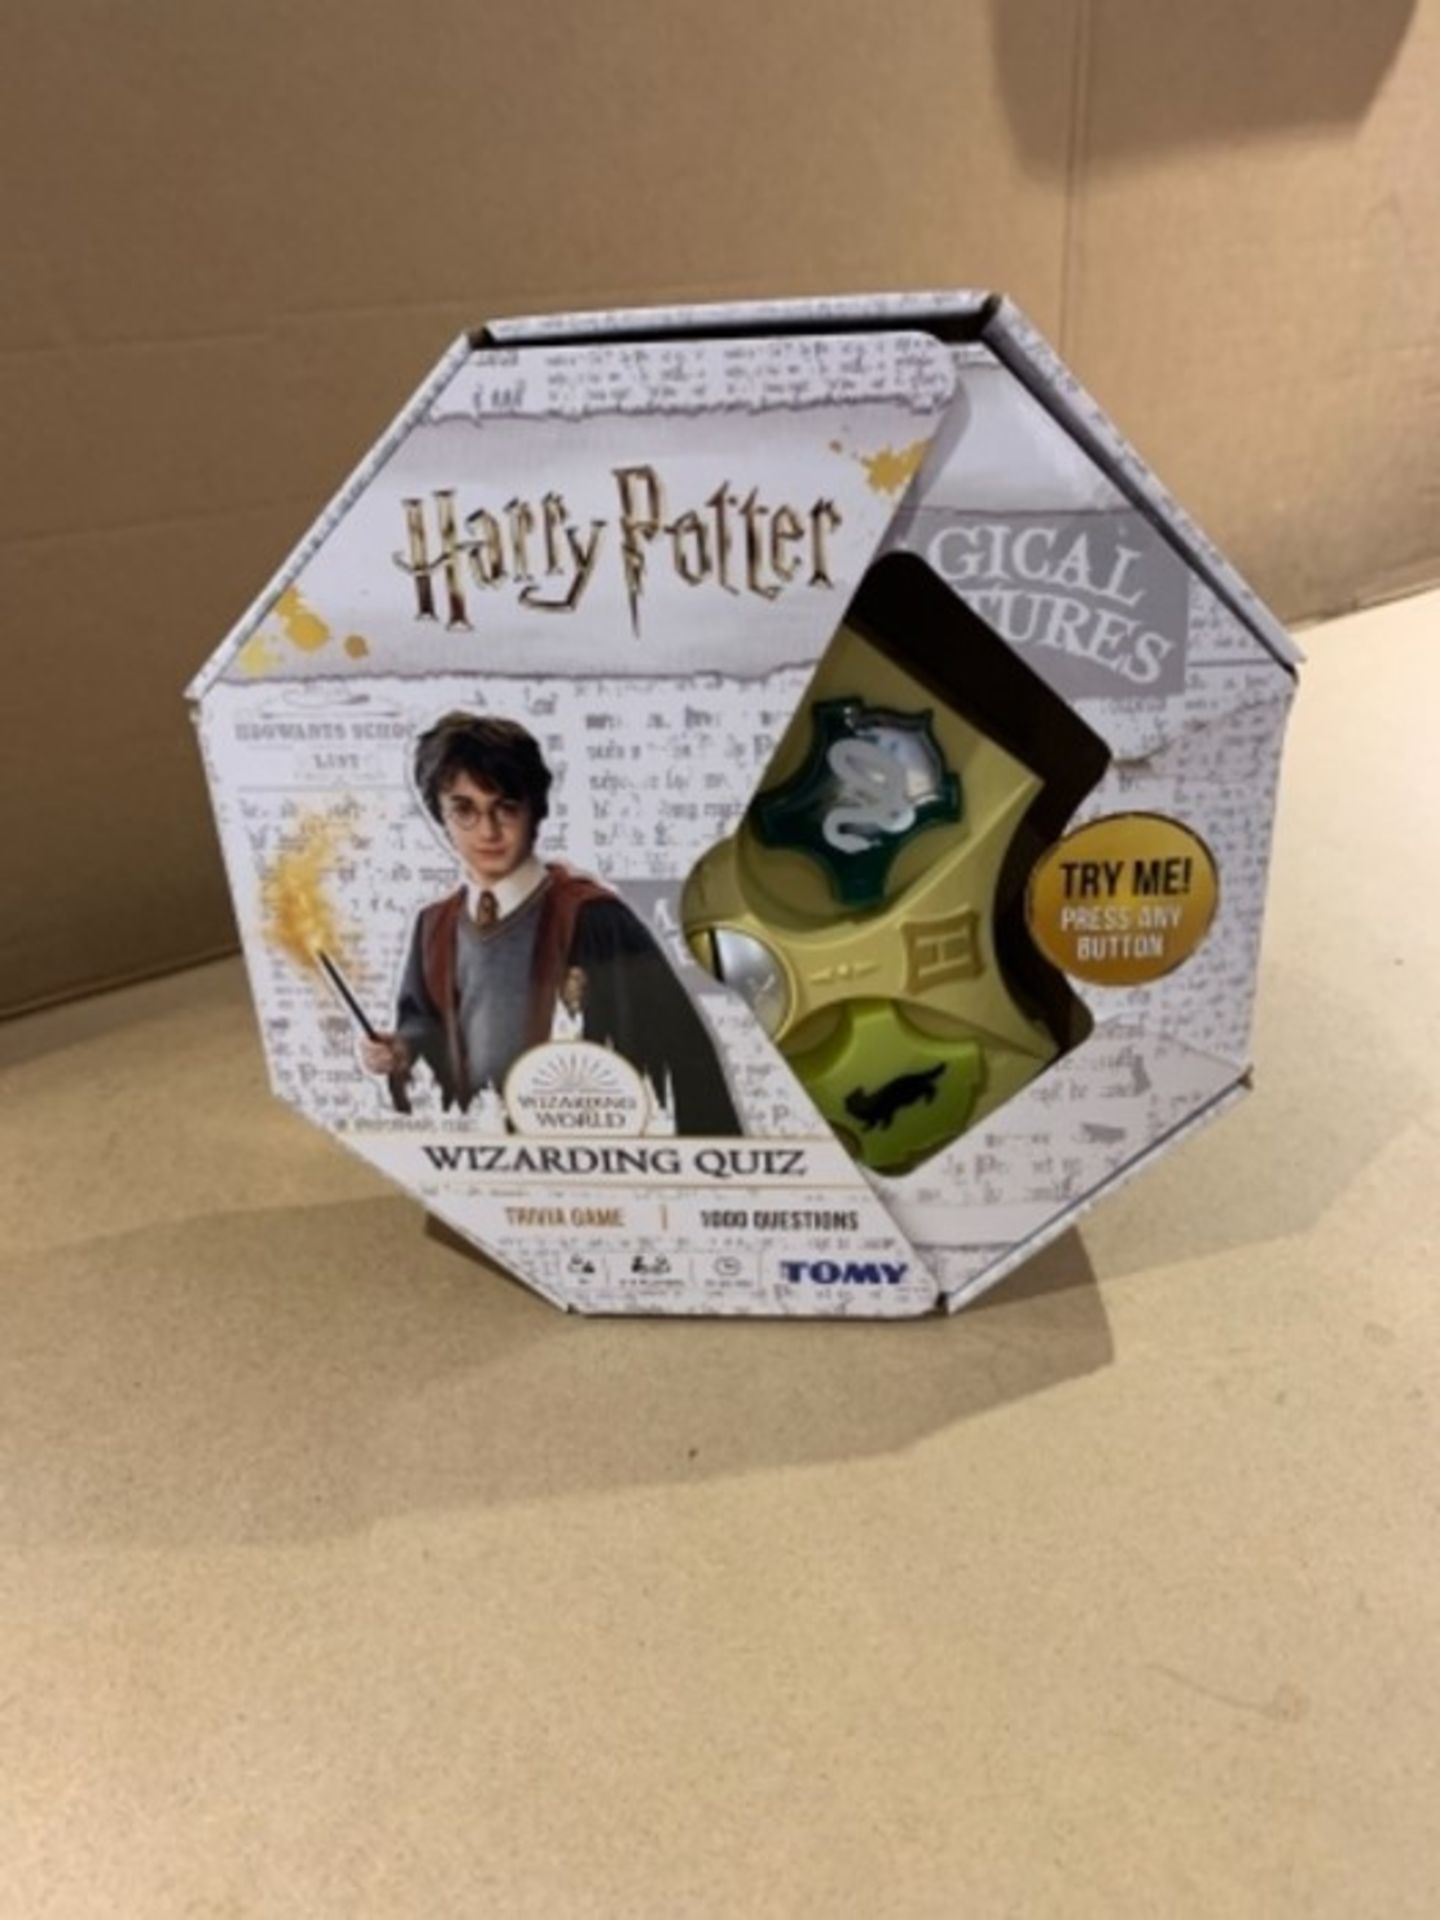 TOMY Games T73181 Harry Potter Electronic Wizard - Image 2 of 2